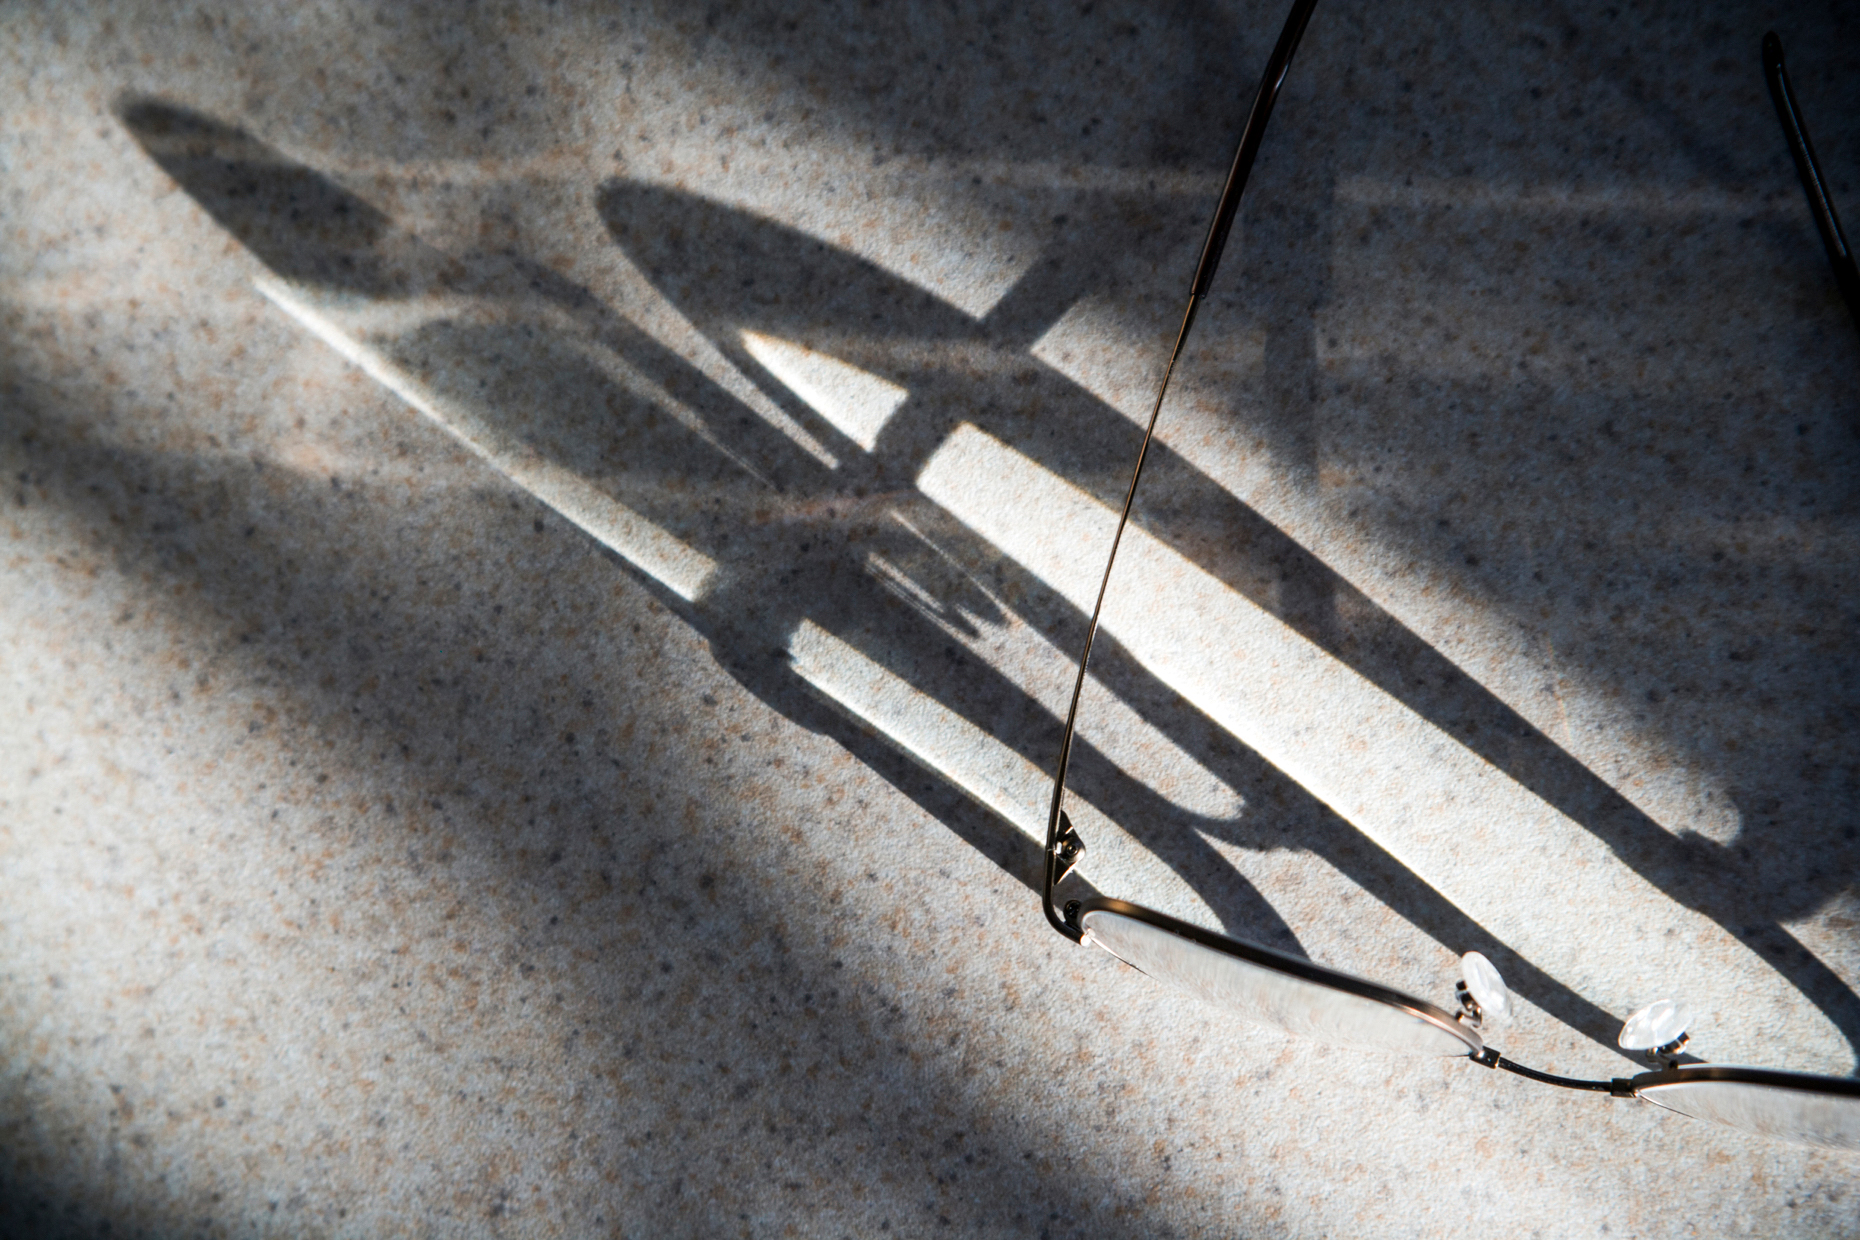 Abstract view of shadows cast by sunlight on reading glasses